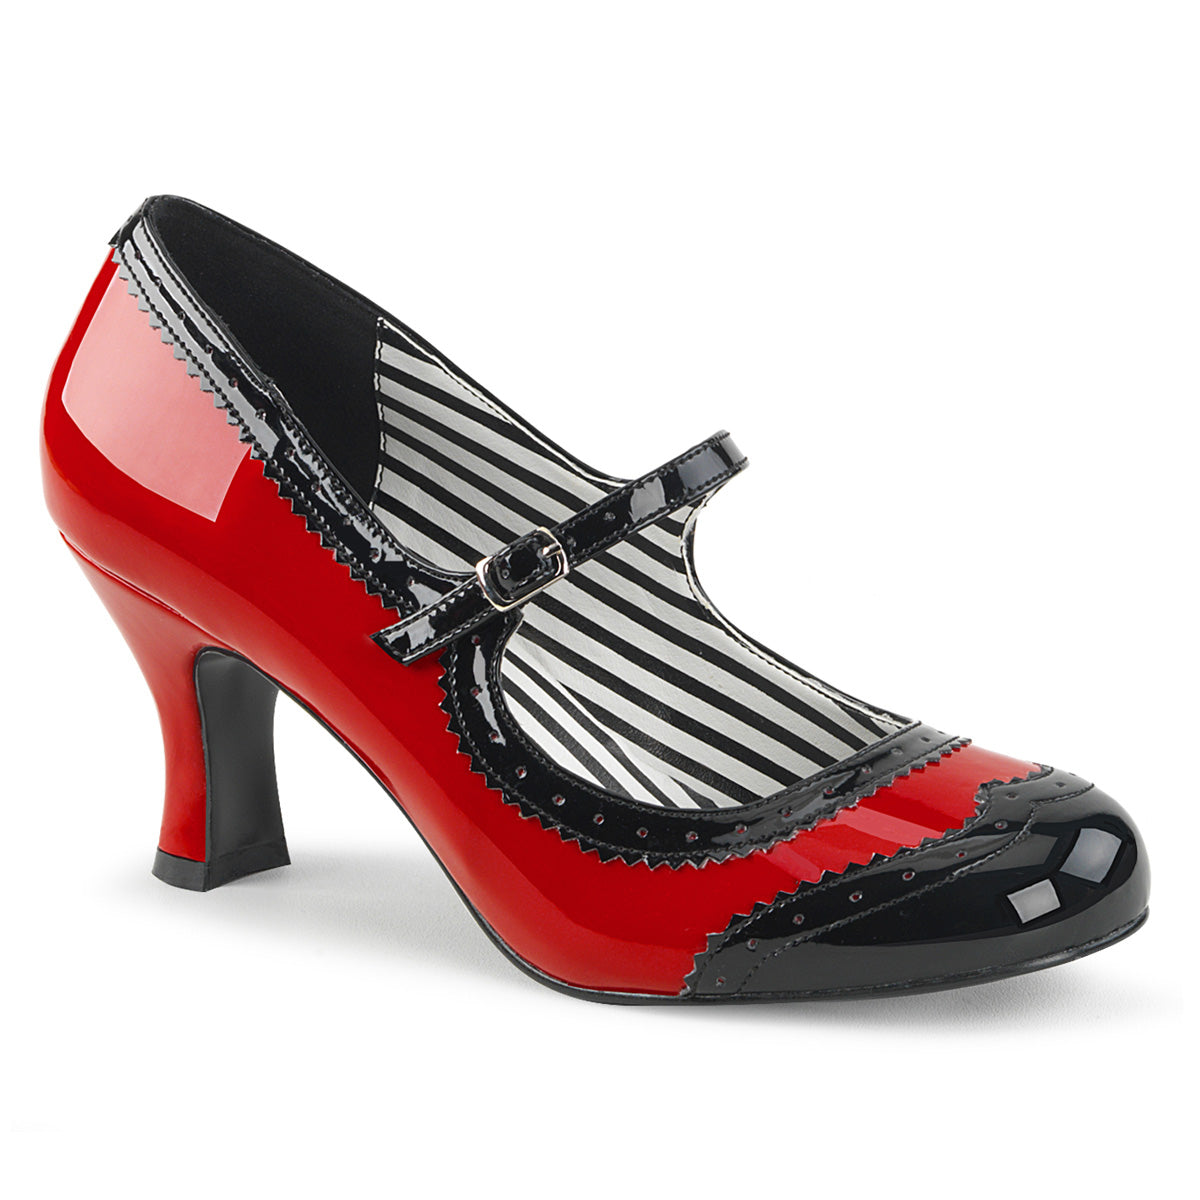 JENNA-06 Pleaser Large Size Ladies Shoes 3 Inch Heel Red Fetish Footwear